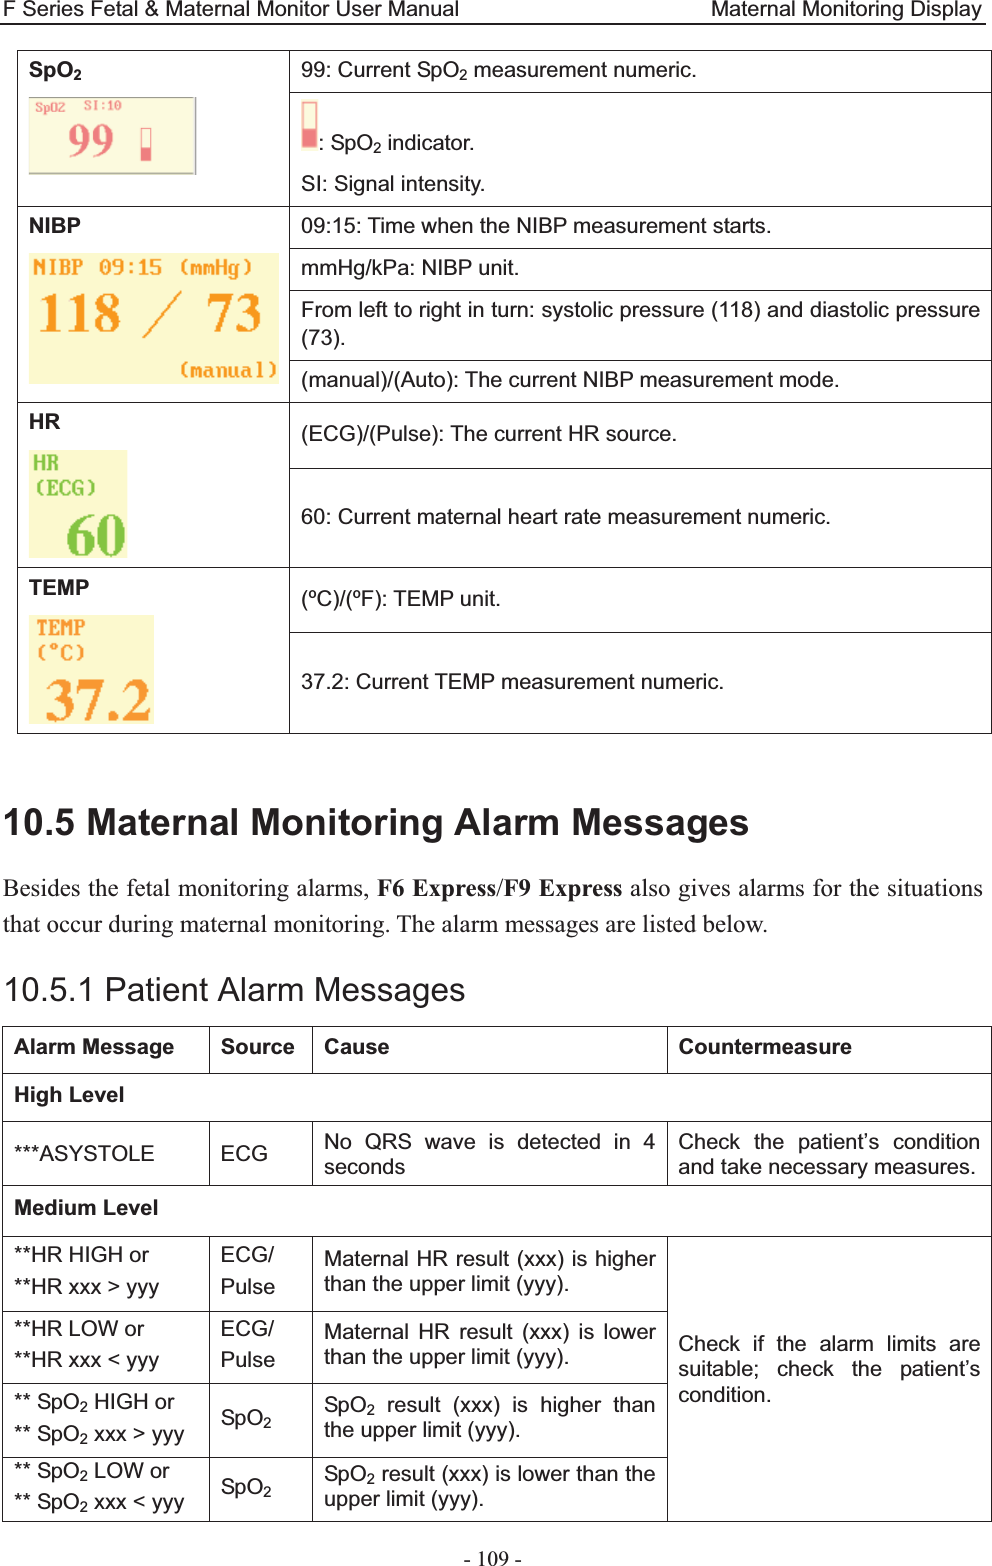 F Series Fetal &amp; Maternal Monitor User Manual                       Maternal Monitoring Display - 109 - SpO299: Current SpO2 measurement numeric.: SpO2 indicator. SI: Signal intensity. NIBP 09:15: Time when the NIBP measurement starts.mmHg/kPa: NIBP unit. From left to right in turn: systolic pressure (118) and diastolic pressure (73). (manual)/(Auto): The current NIBP measurement mode. HR  (ECG)/(Pulse): The current HR source. 60: Current maternal heart rate measurement numeric. TEMP (ºC)/(ºF): TEMP unit. 37.2: Current TEMP measurement numeric.  10.5 Maternal Monitoring Alarm Messages Besides the fetal monitoring alarms, F6 Express/F9 Express also gives alarms for the situations that occur during maternal monitoring. The alarm messages are listed below. 10.5.1 Patient Alarm Messages Alarm Message  Source  Cause  Countermeasure High Level ***ASYSTOLE ECG No QRS wave is detected in 4 seconds Check the patient’s condition and take necessary measures.Medium Level **HR HIGH or **HR xxx &gt; yyy ECG/ Pulse Maternal HR result (xxx) is higher than the upper limit (yyy).    Check if the alarm limits are suitable; check the patient’s condition.    **HR LOW or **HR xxx &lt; yyy ECG/ Pulse Maternal HR result (xxx) is lower than the upper limit (yyy). ** SpO2 HIGH or ** SpO2 xxx &gt; yyy  SpO2 SpO2 result (xxx) is higher than the upper limit (yyy). ** SpO2 LOW or ** SpO2 xxx &lt; yyy  SpO2 SpO2 result (xxx) is lower than the upper limit (yyy). 